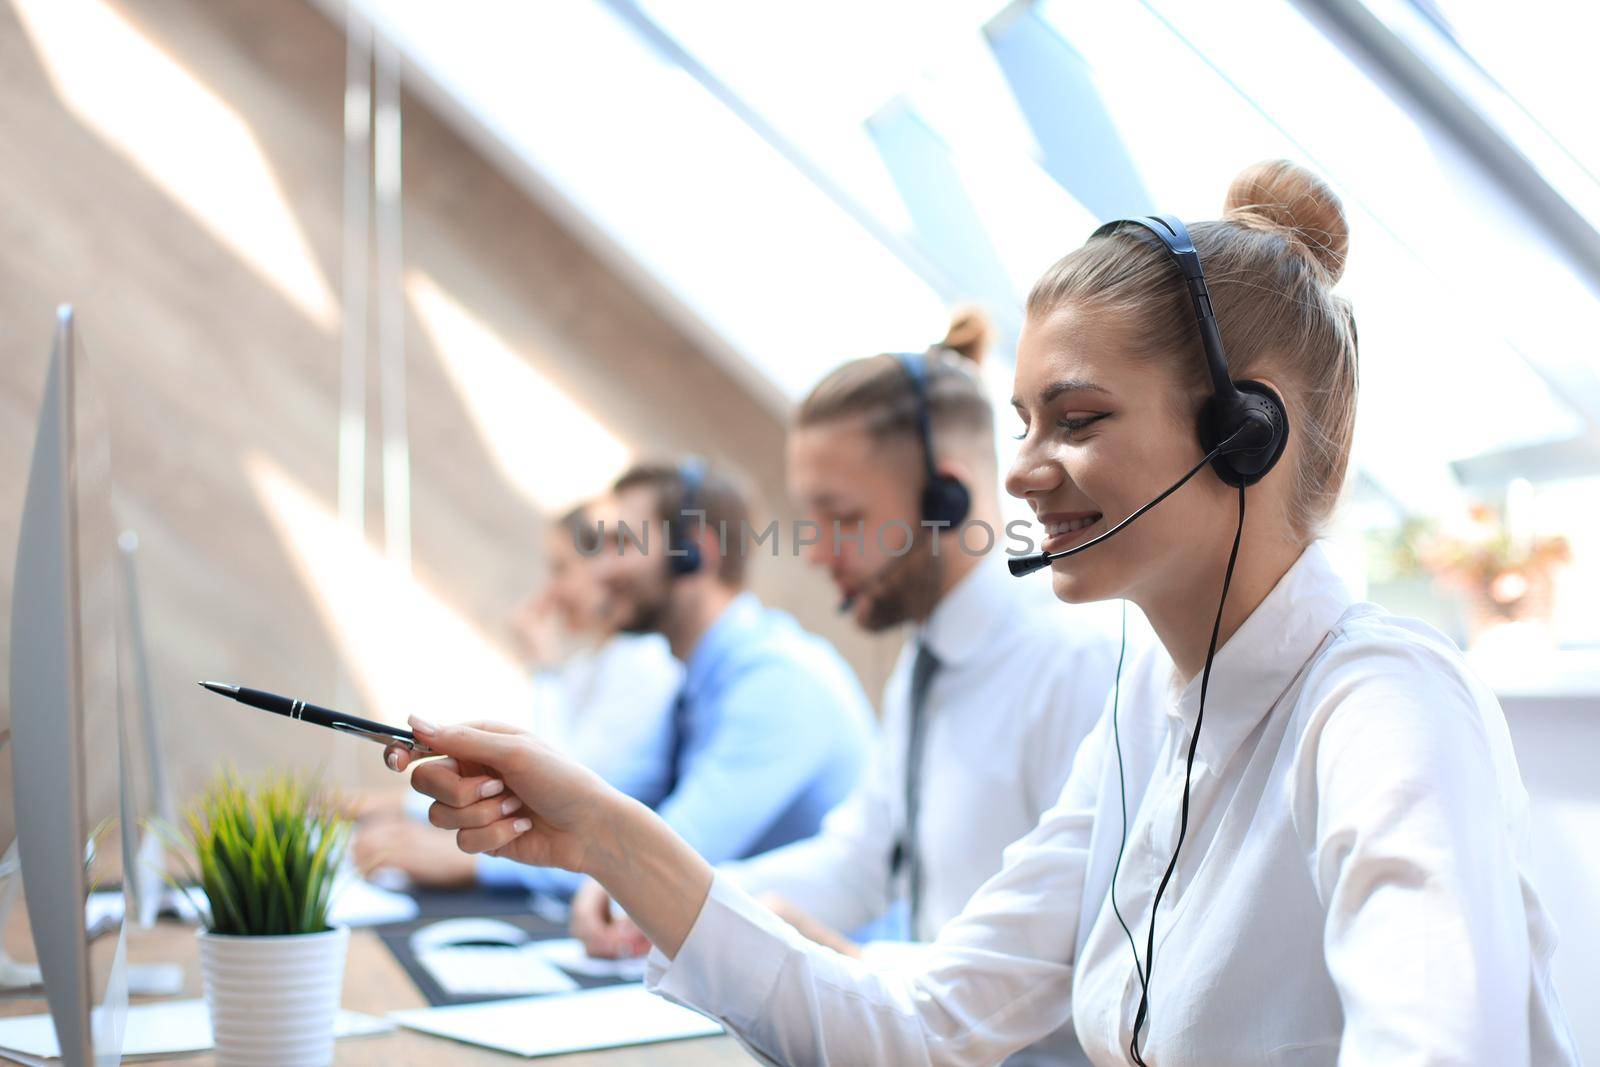 Female customer support operator with headset and smiling accompanied by her team